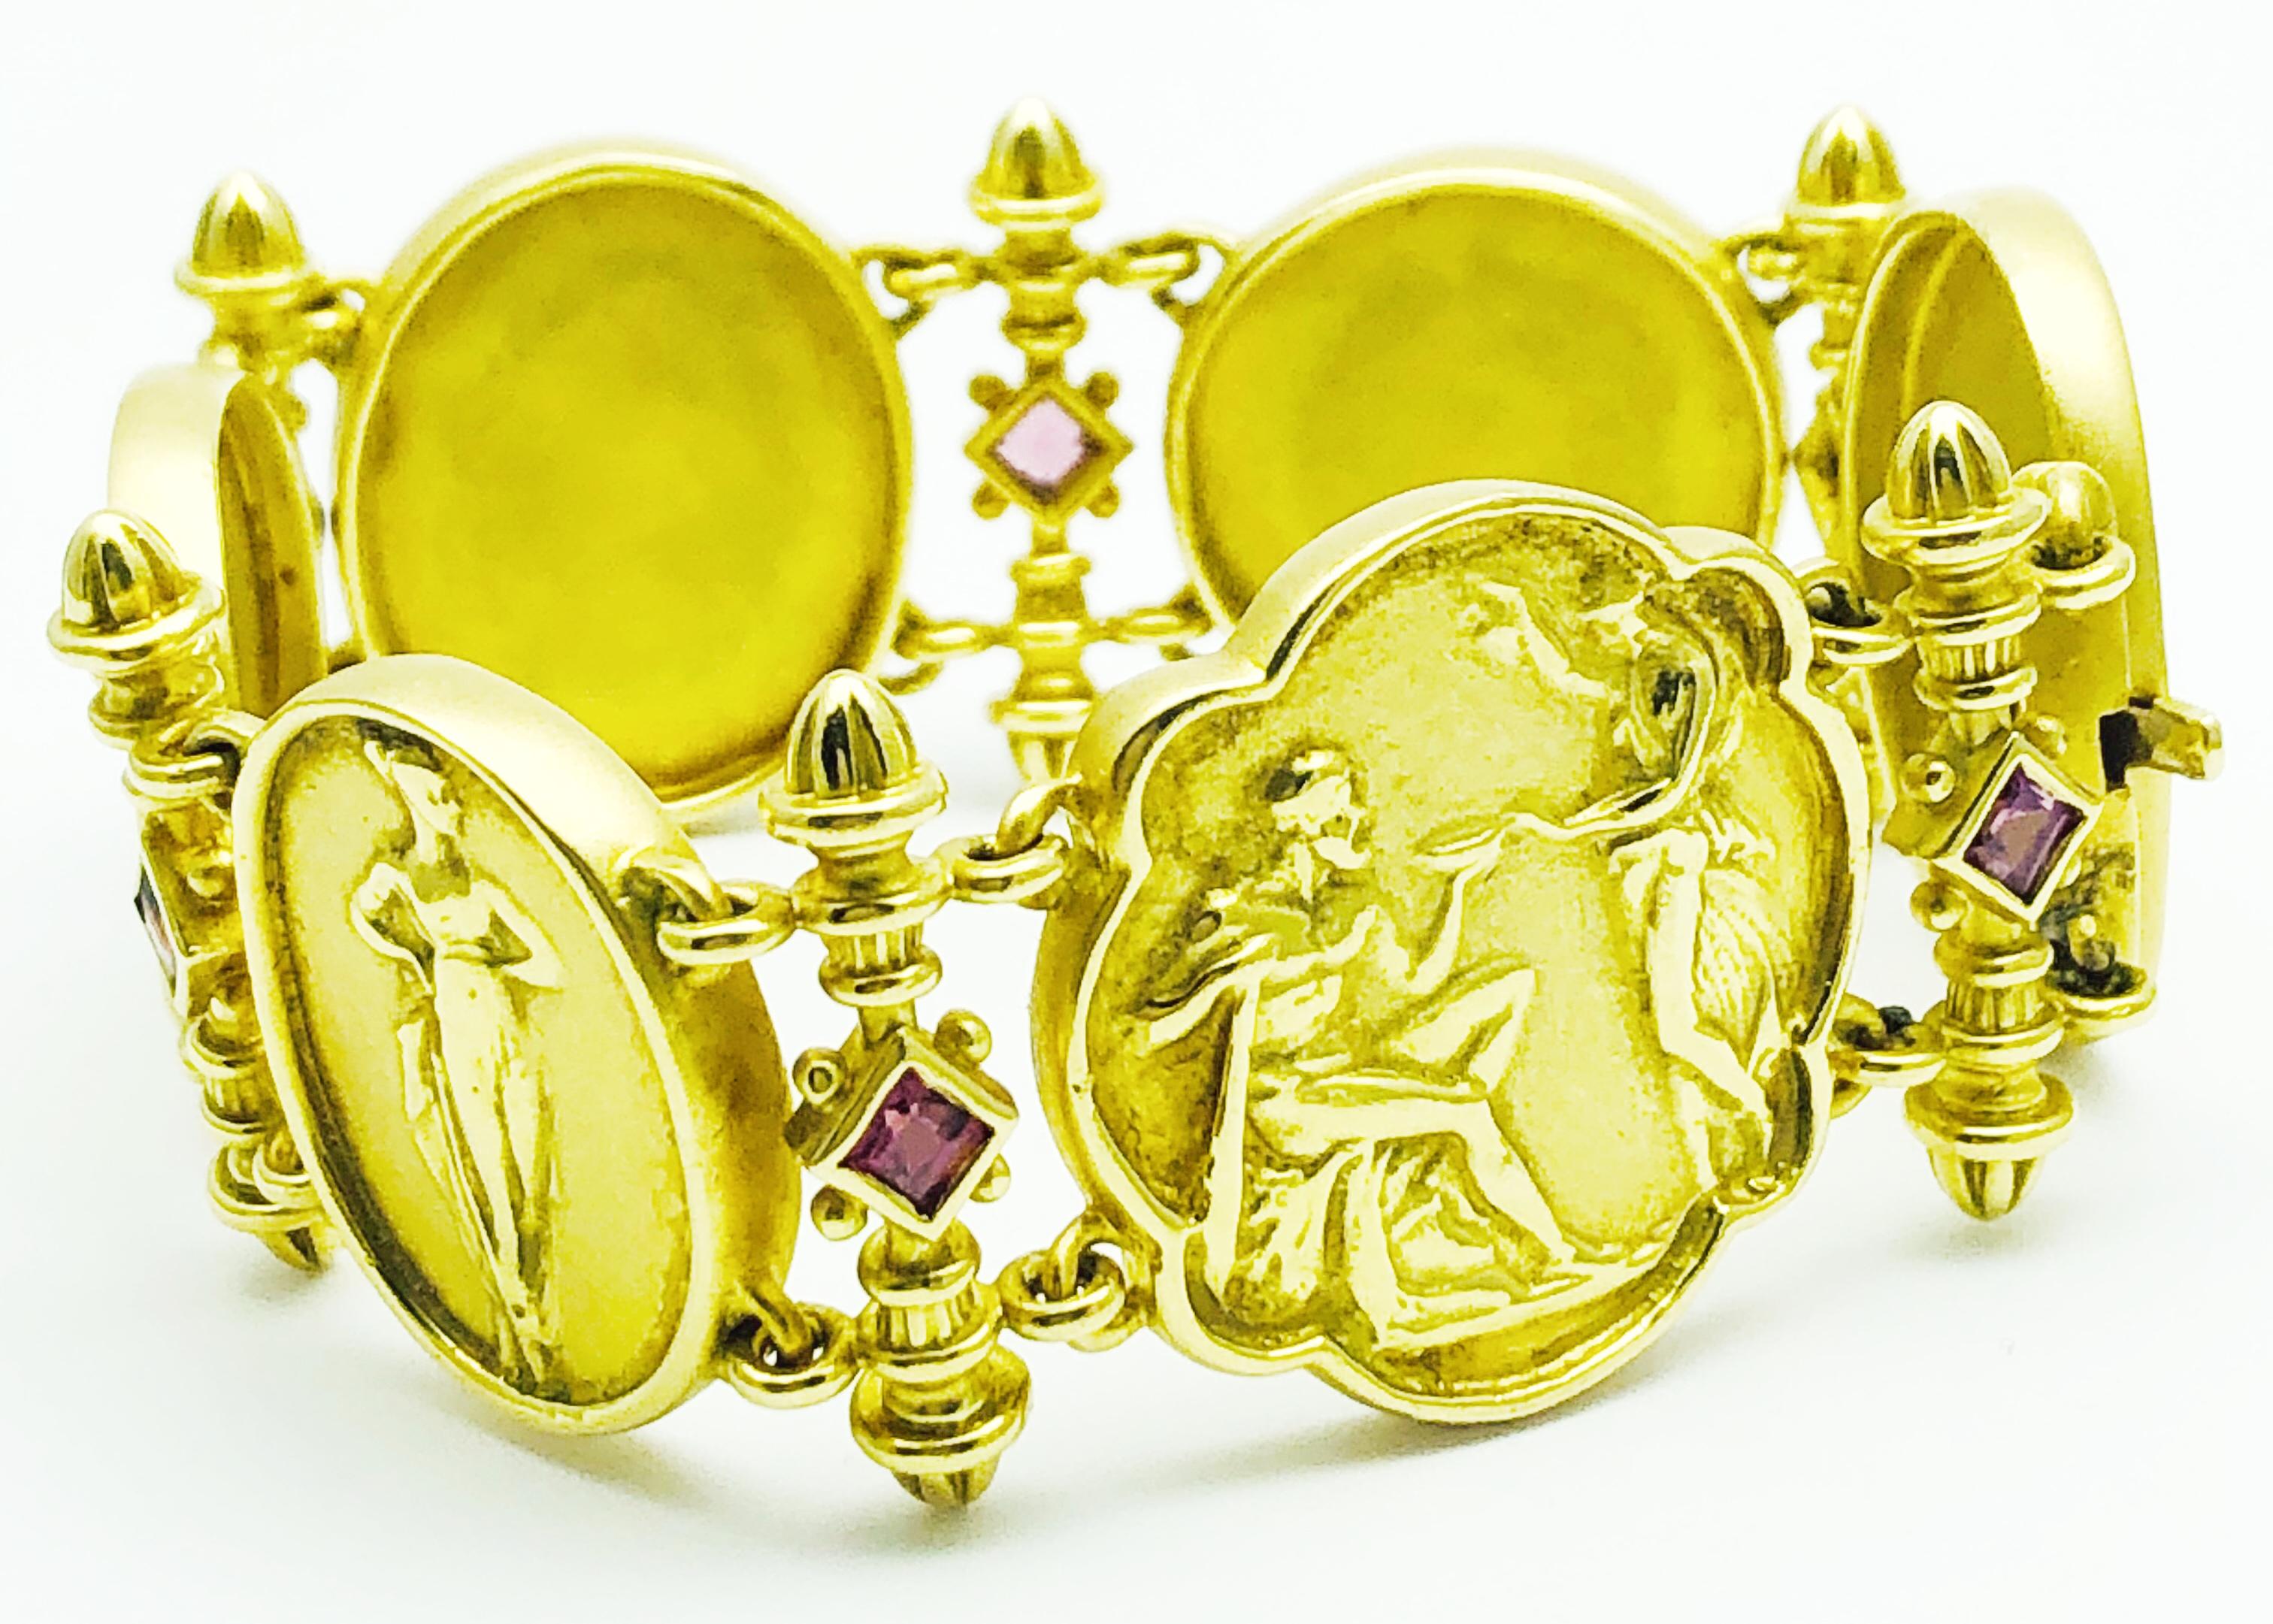 Absolutely Gorgeous SeidenGang 18K Yellow Gold Bracelet! This Piece has 6 round and Oval plaques with greco Roman Figures set in bas relief. Each Plaque is separated by a bezel set, Square, Pink Tourmaline. The bracelet is 7 inches long. The largest